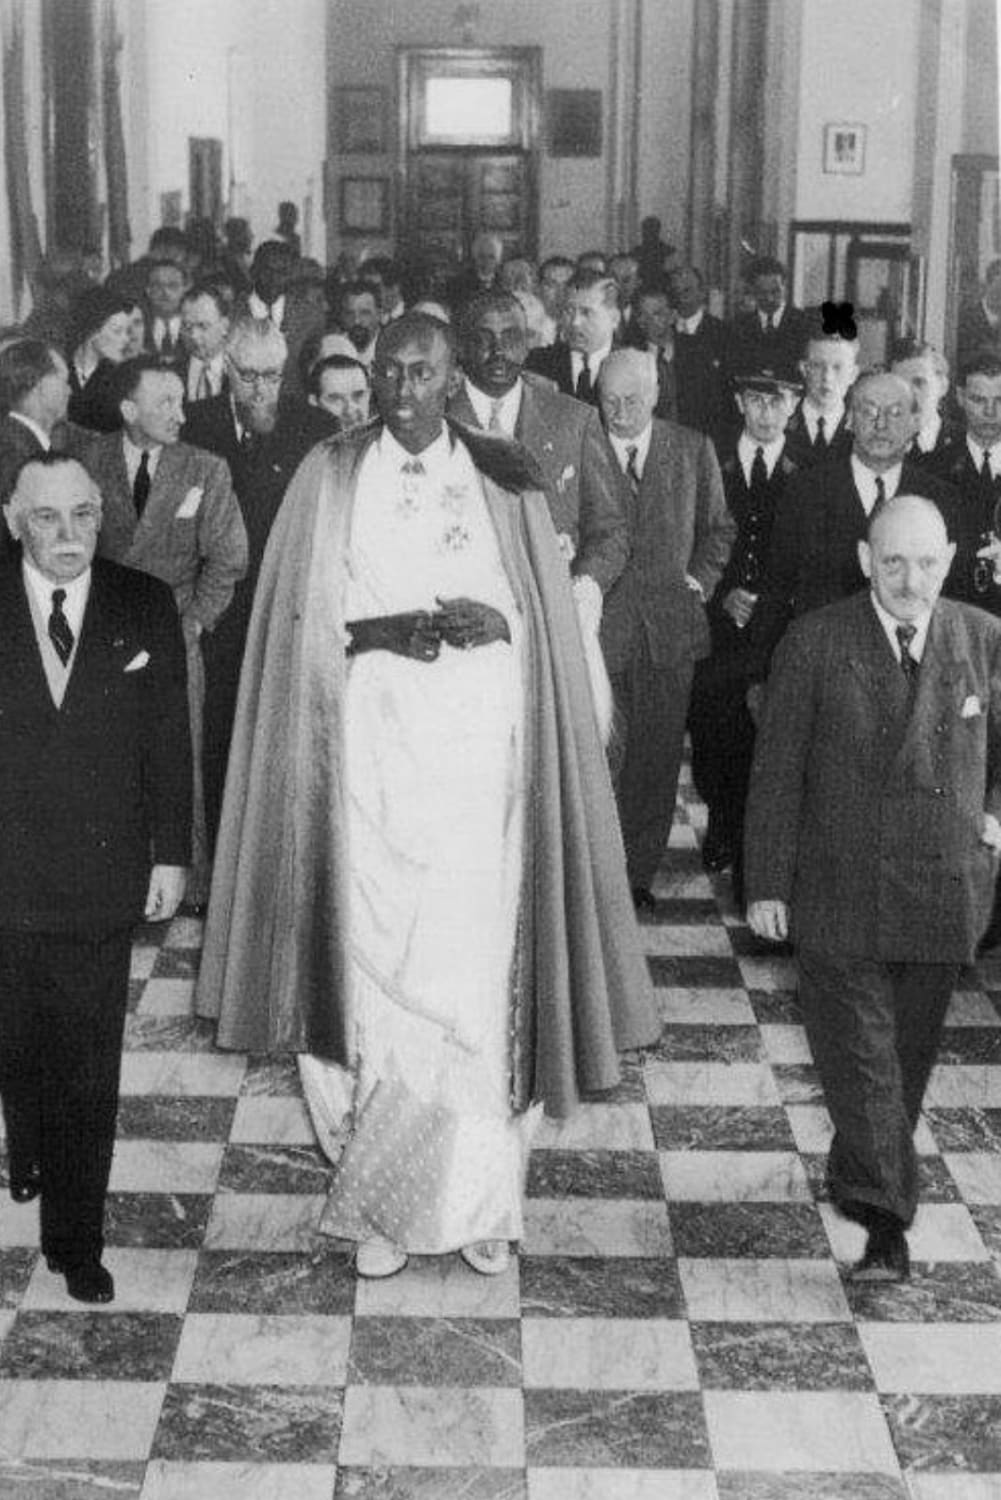 Mwami (King) Mutara III Rudahigwa of Rwanda on a state visit to Belgium, 1949. The King - reign 1931 to 1959 - was the first Roman Catholic convert in the history of the monarchy; his father before him had refused under foreign pressure and been deposed.